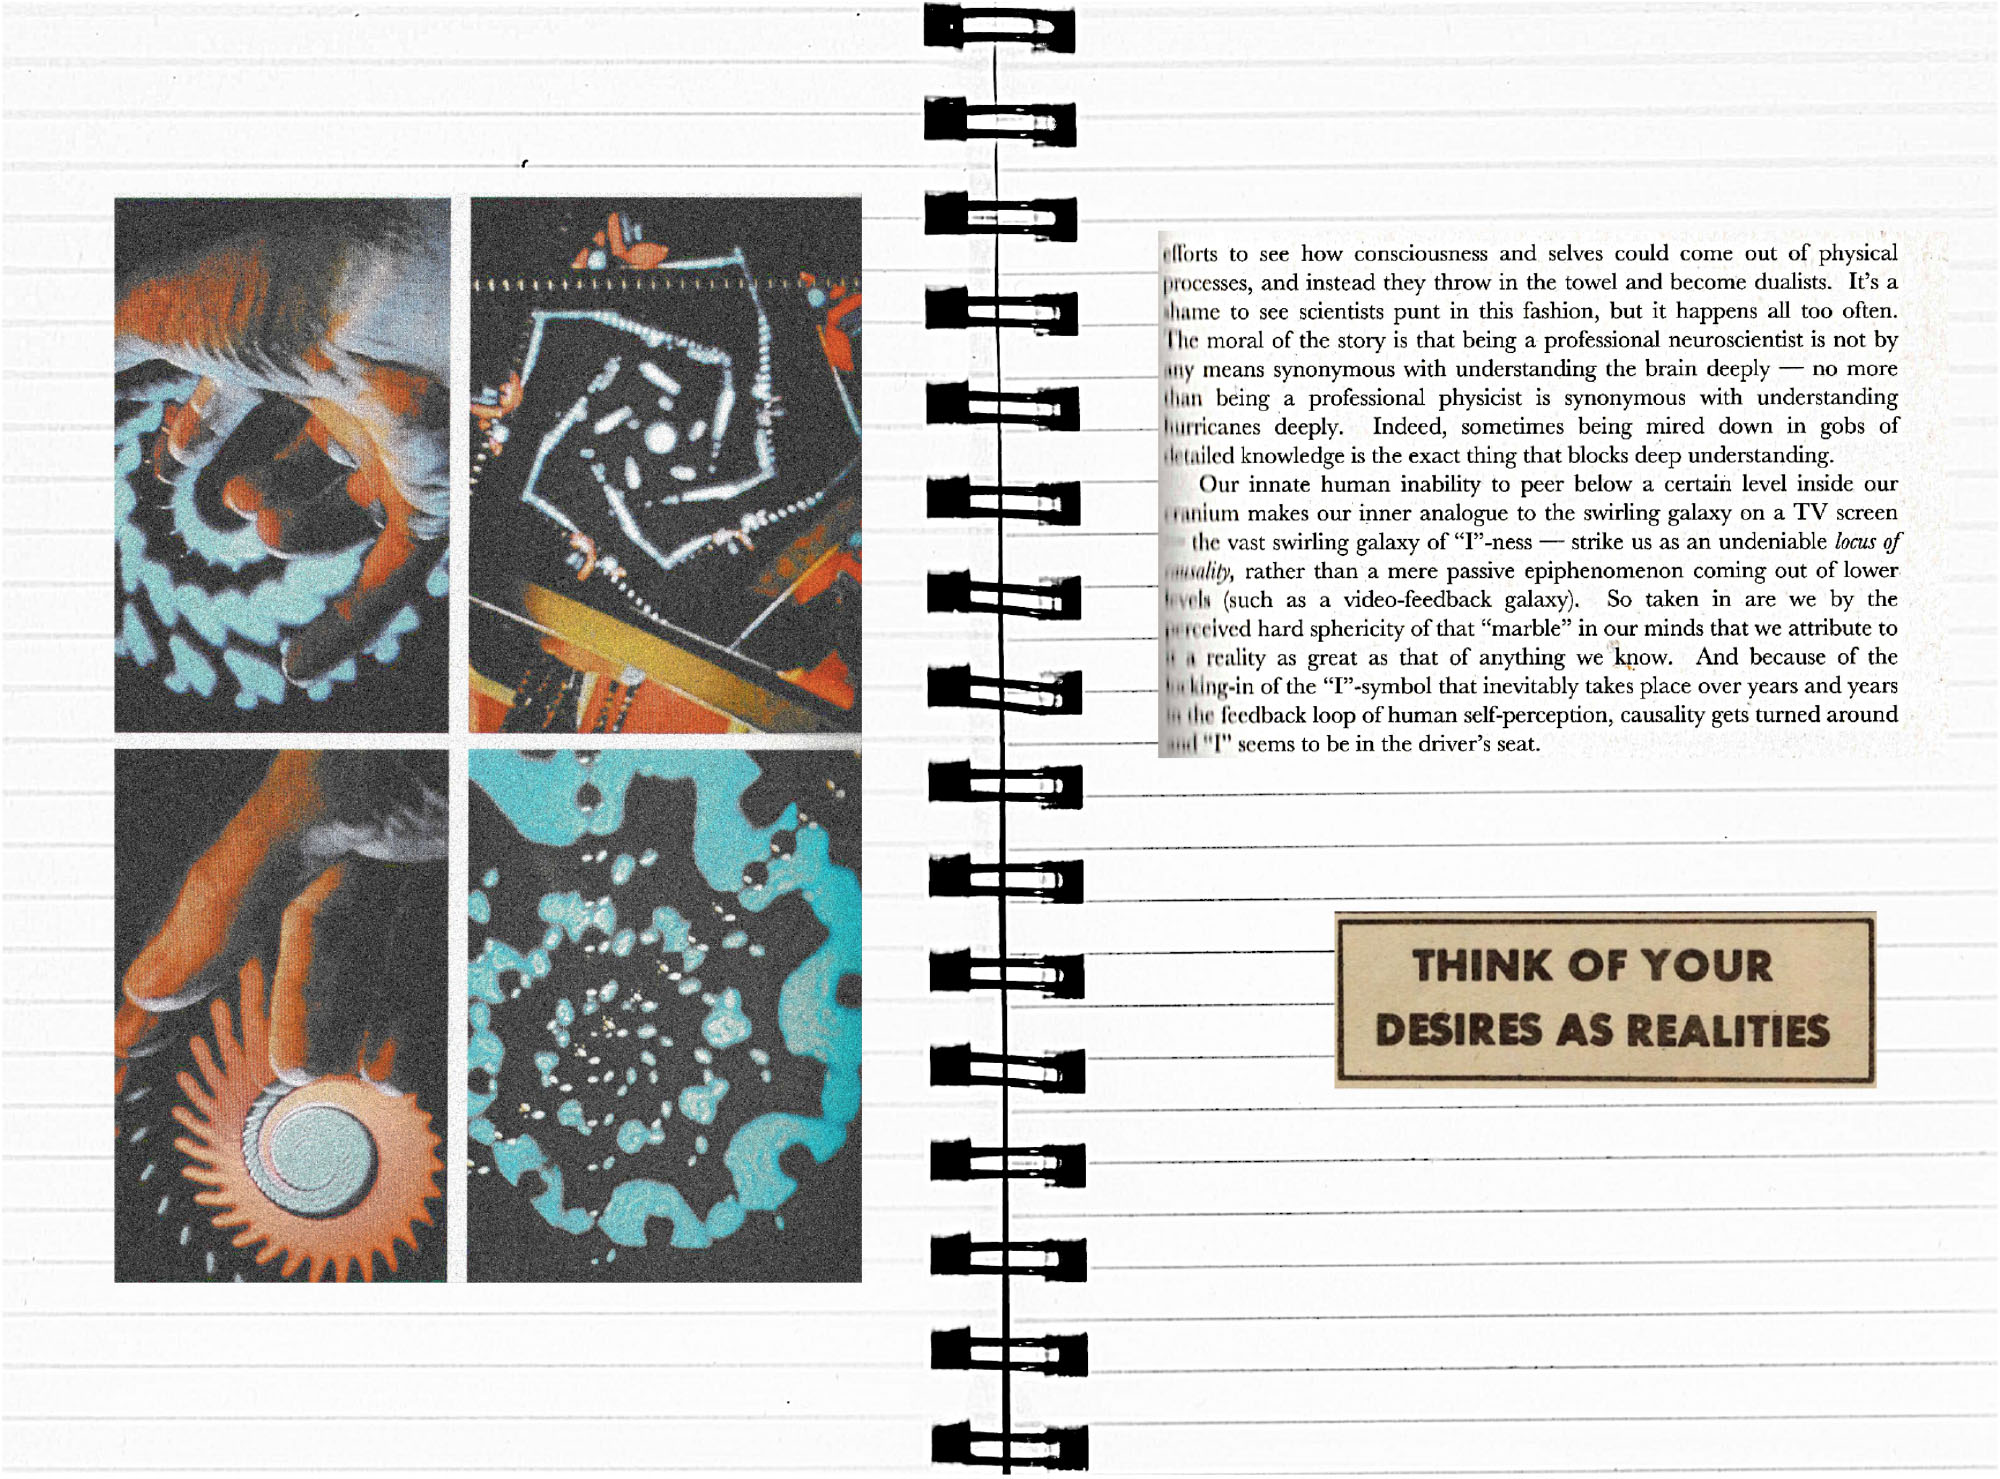 exmouth_scrapbook_notes_on_utopia_final_version-7